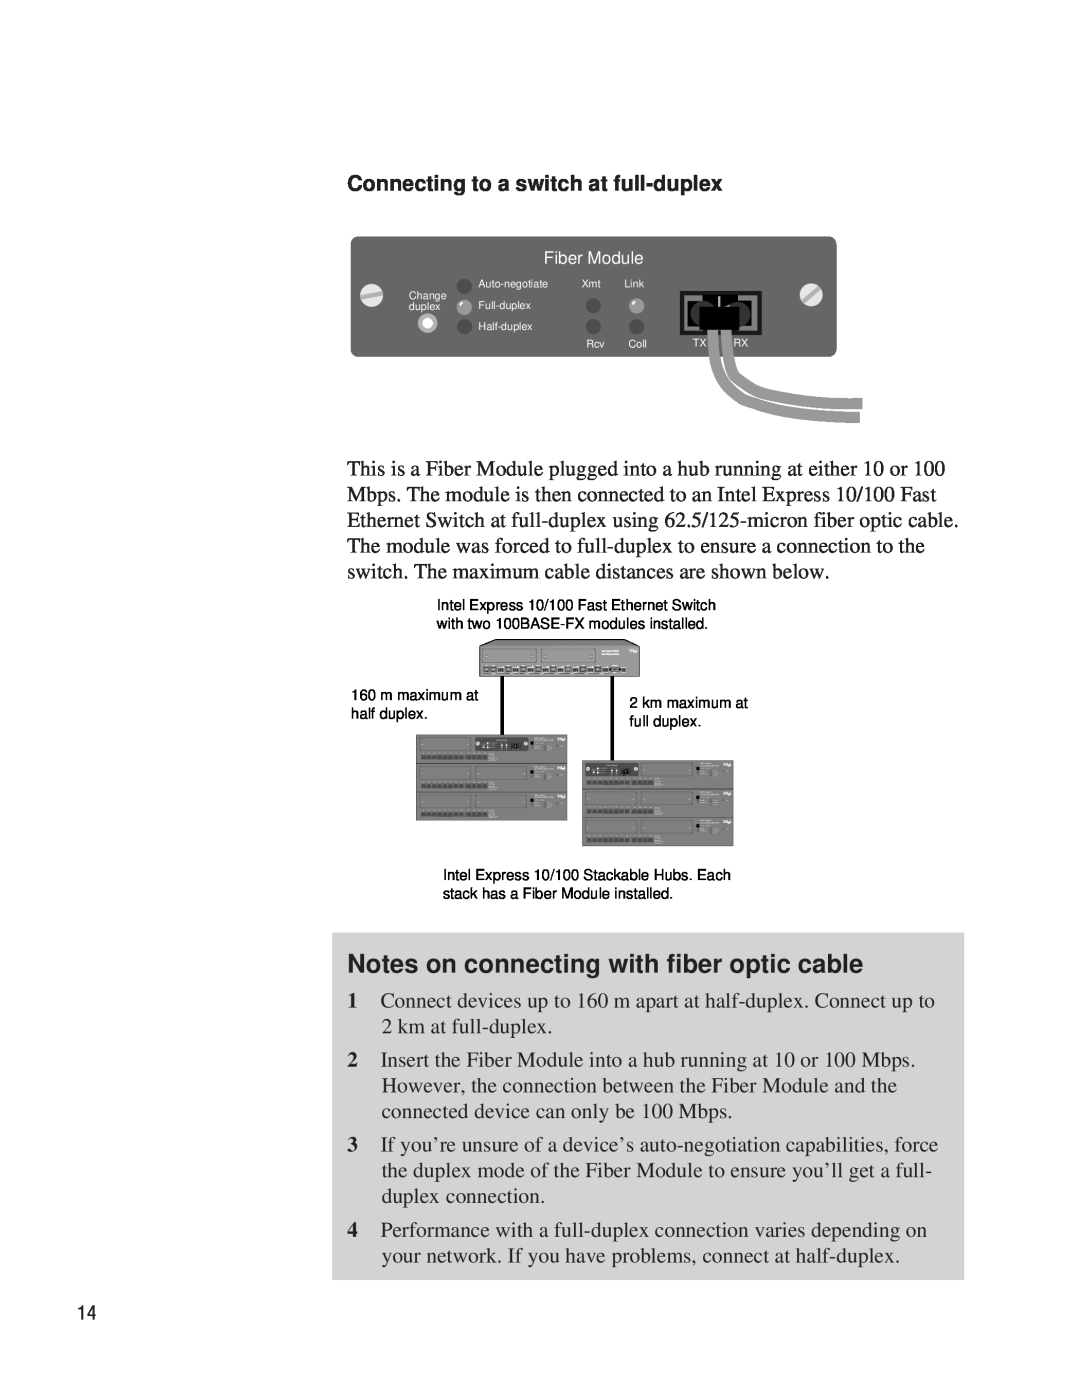 Intel EE110EM manual Notes on connecting with fiber optic cable, half duplex, full duplex 